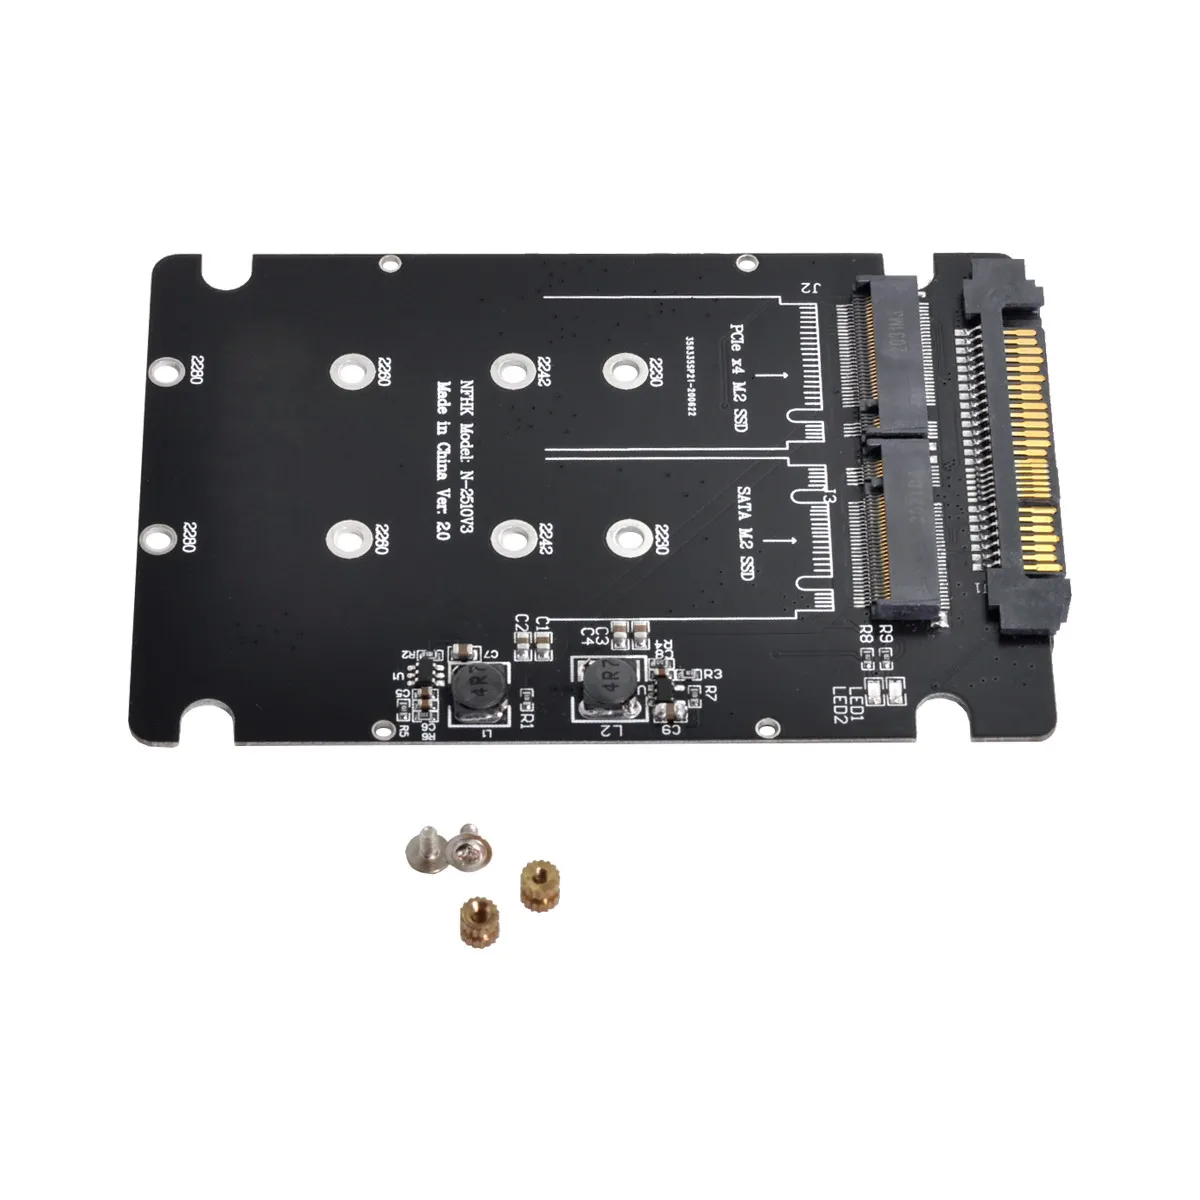 

CY CYSM SFF-8639 NVME U.2 to Combo NGFF M.2 M-key SATA PCIe SSD Adapter for Mainboard Replace SSD 750 p3600 p3700